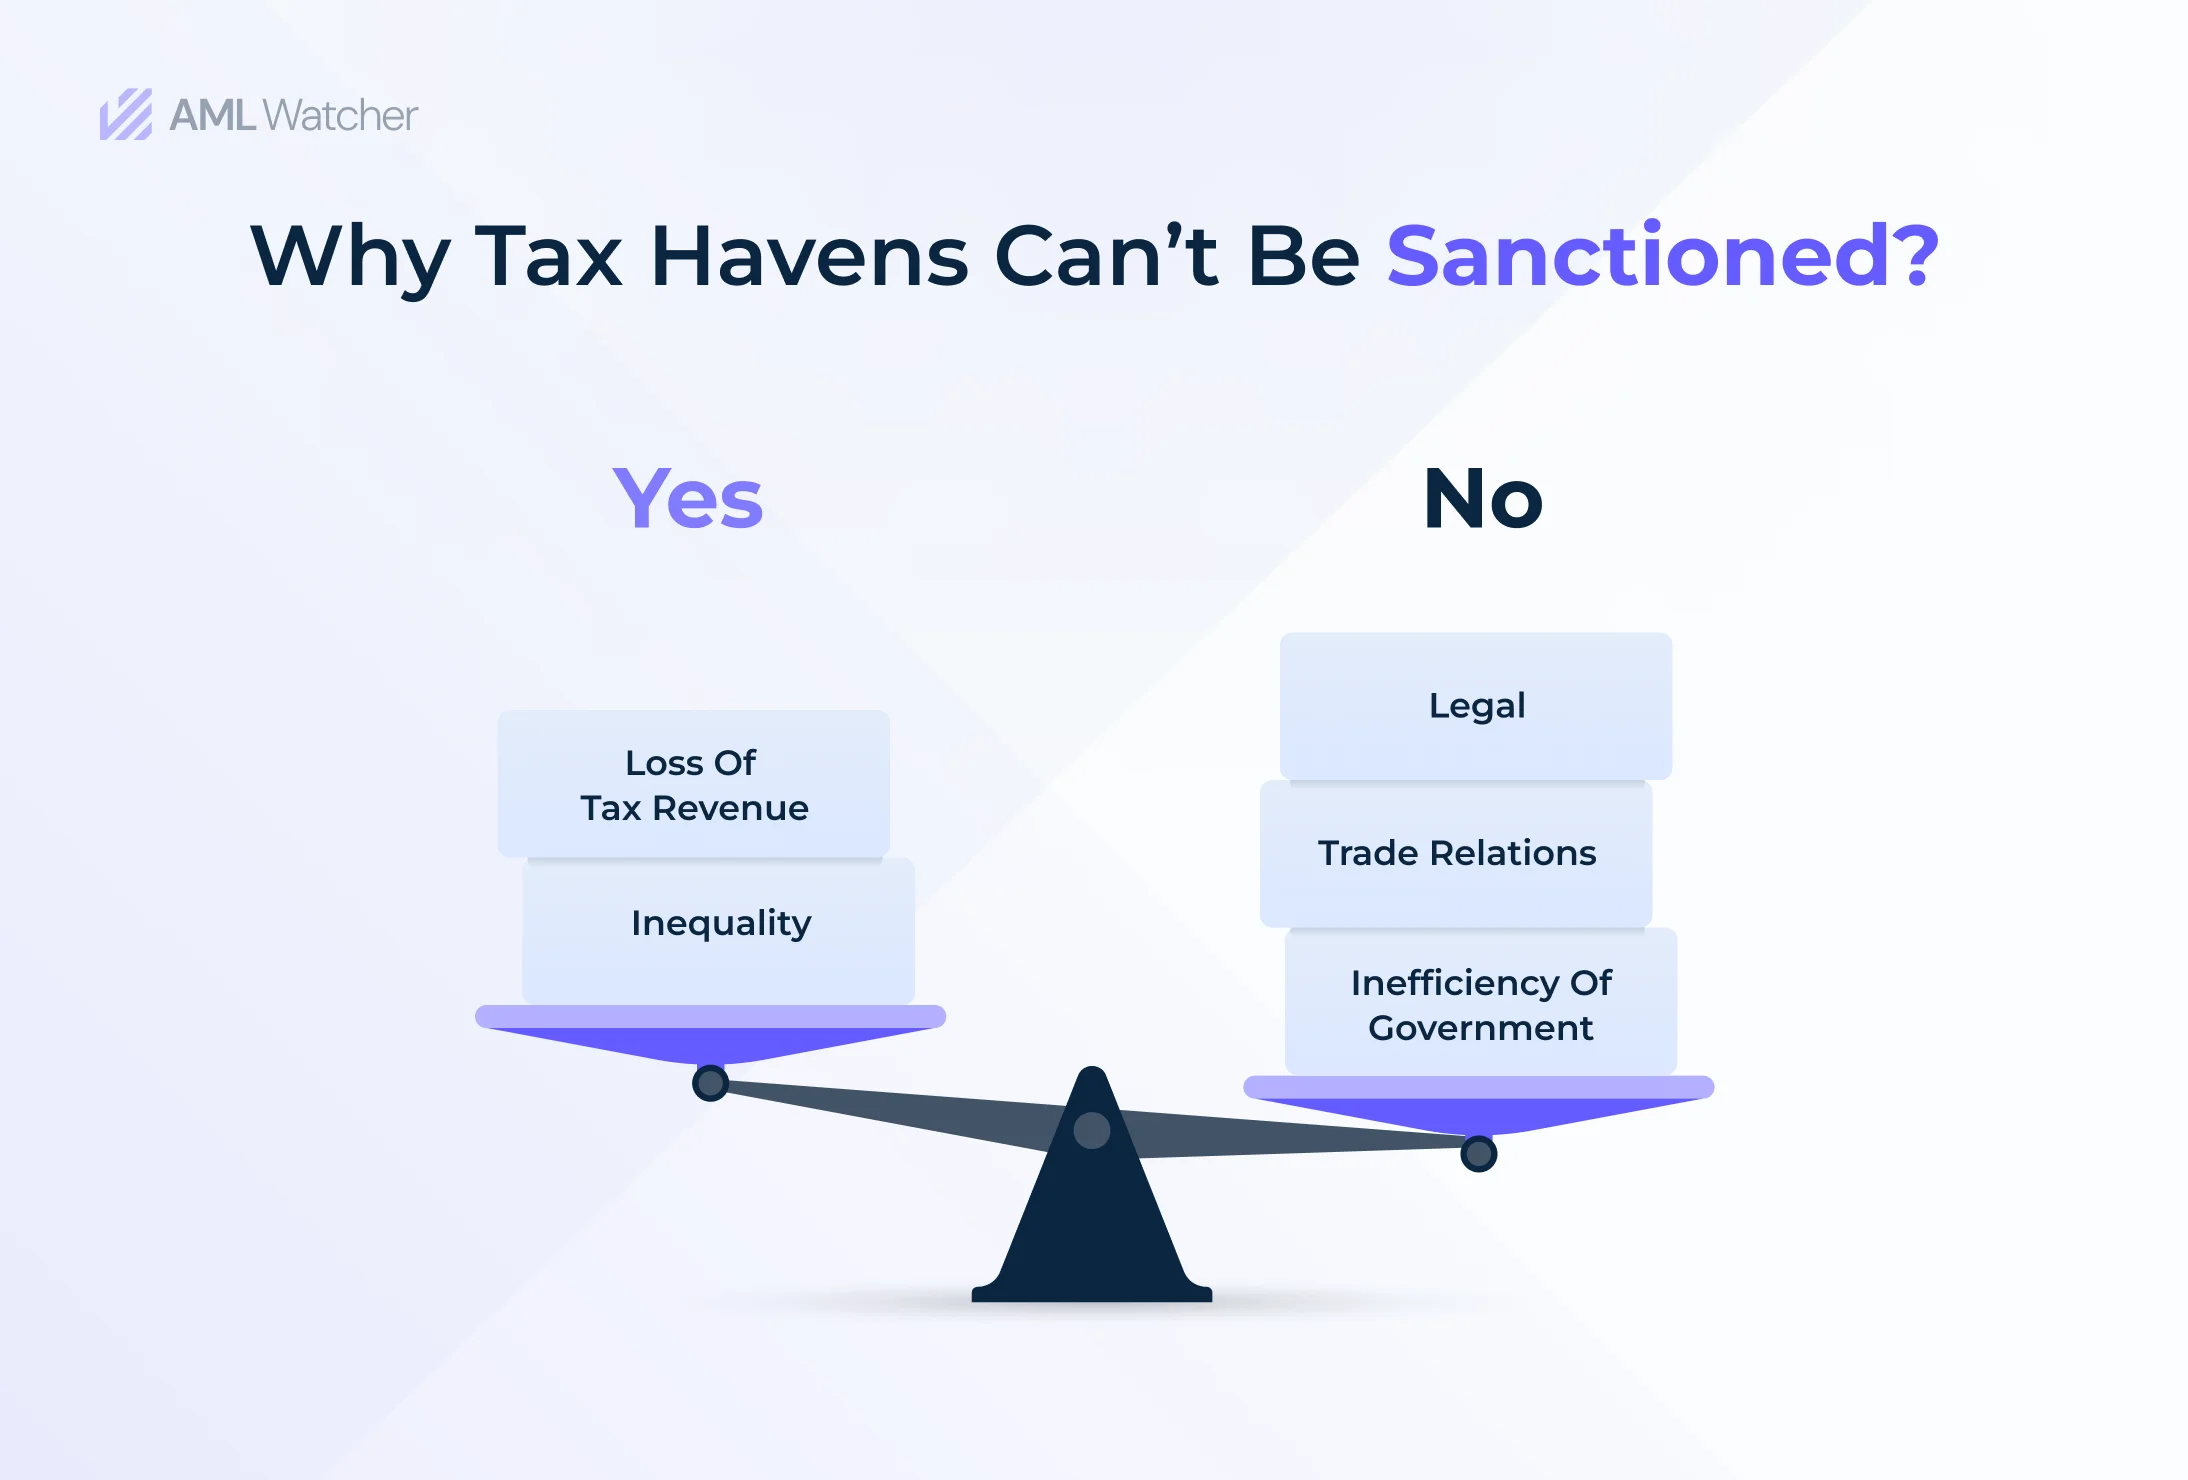 This image Shows Why Tax Havens Can’t be sanctioned.